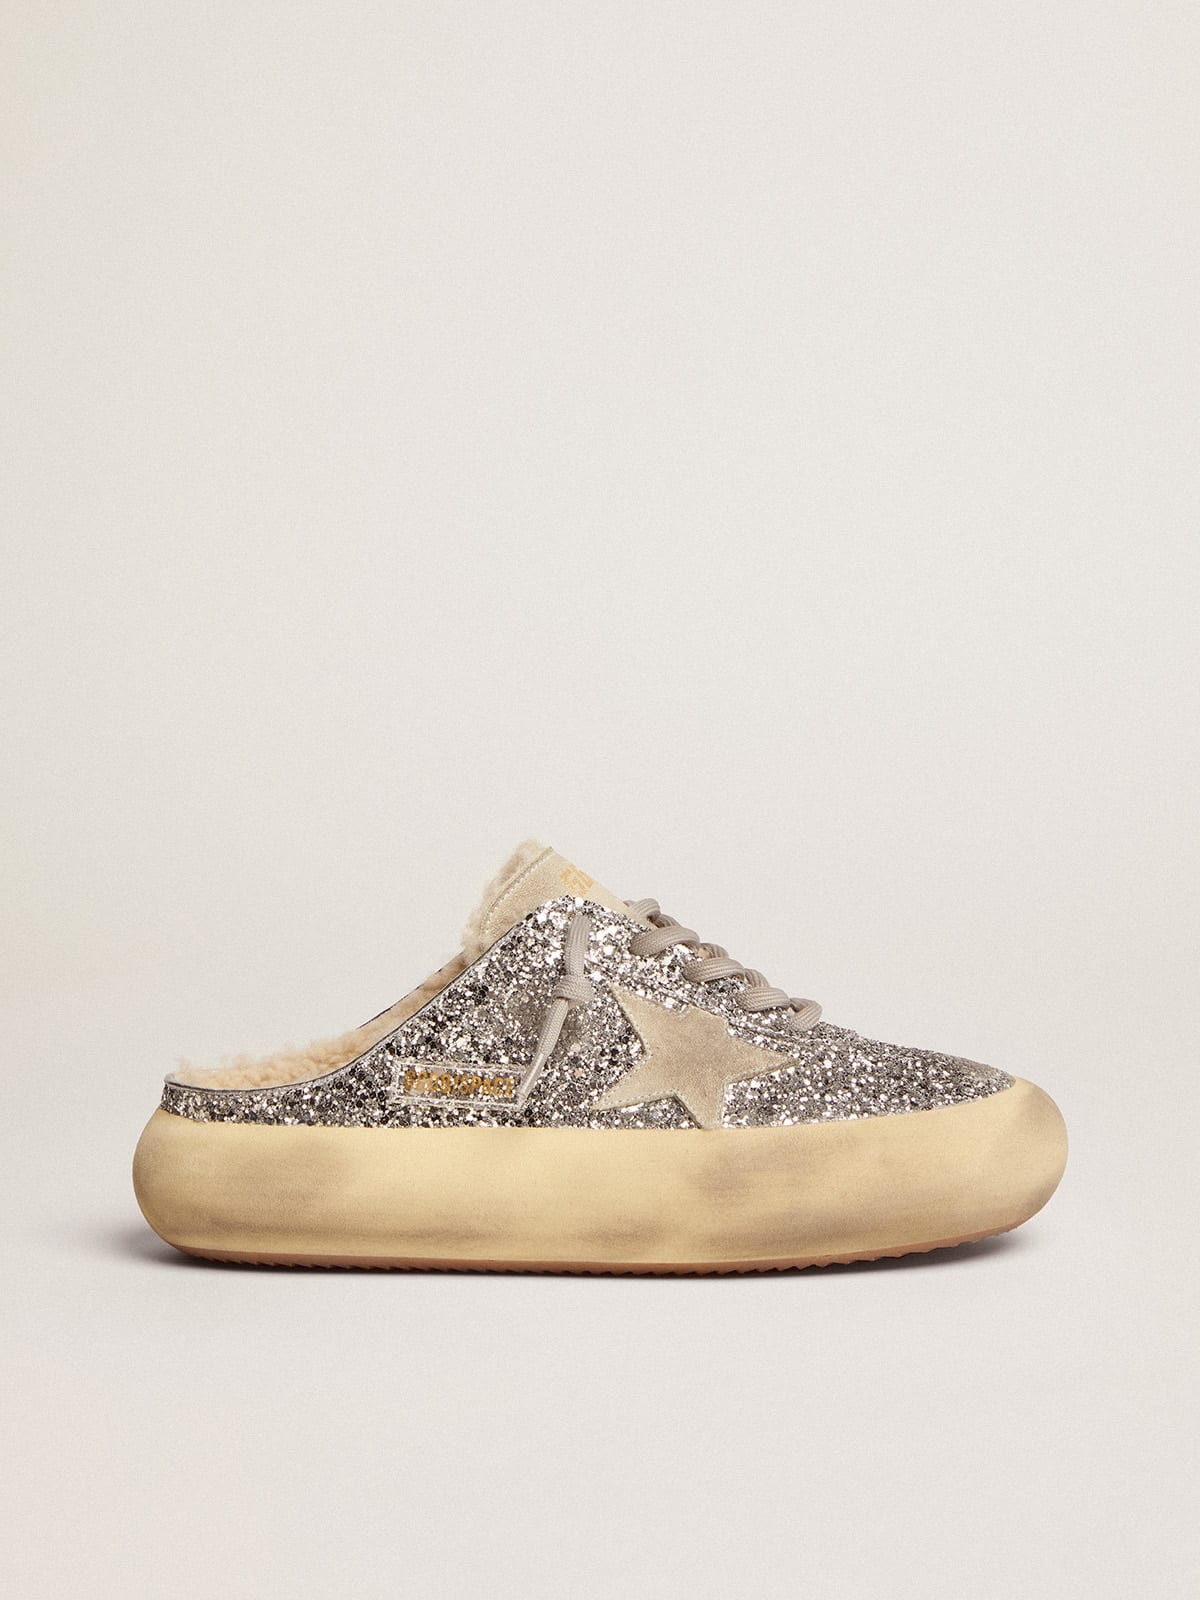 Space-Star Sabot shoes in silver glitter with shearling lining - 1